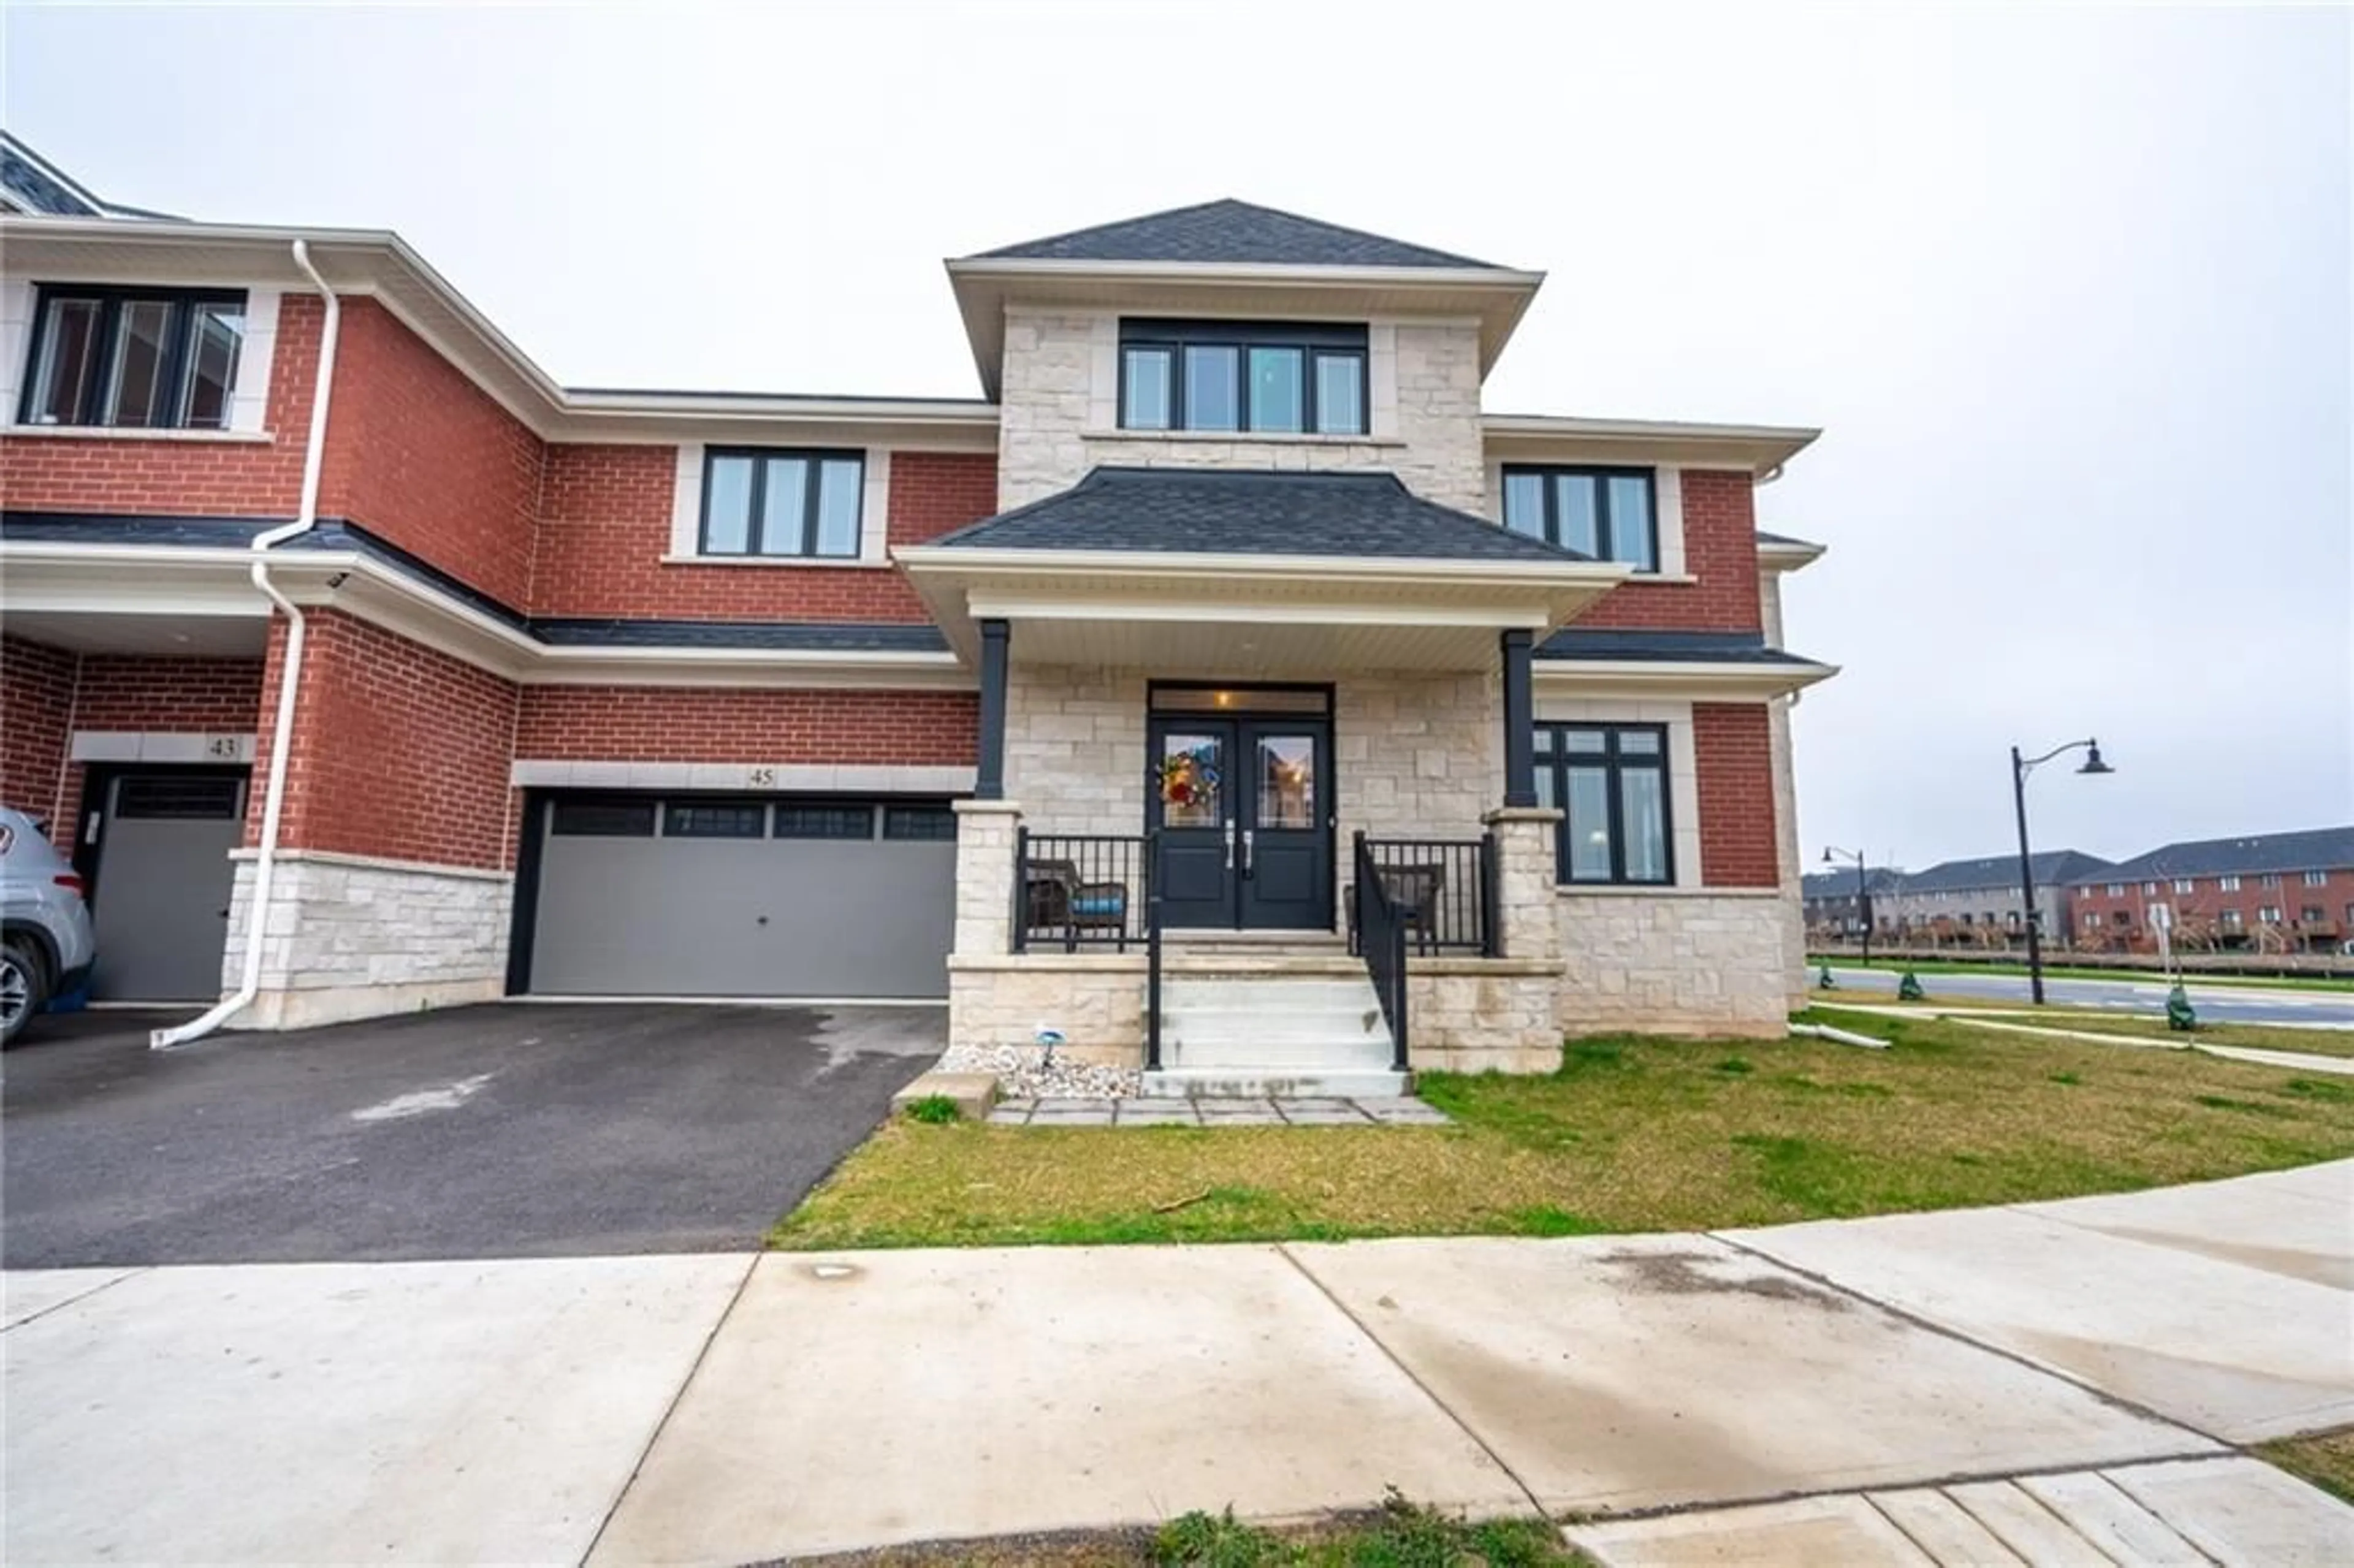 Home with brick exterior material for 45 GREAT FALLS Blvd, Waterdown Ontario L8B 1X8